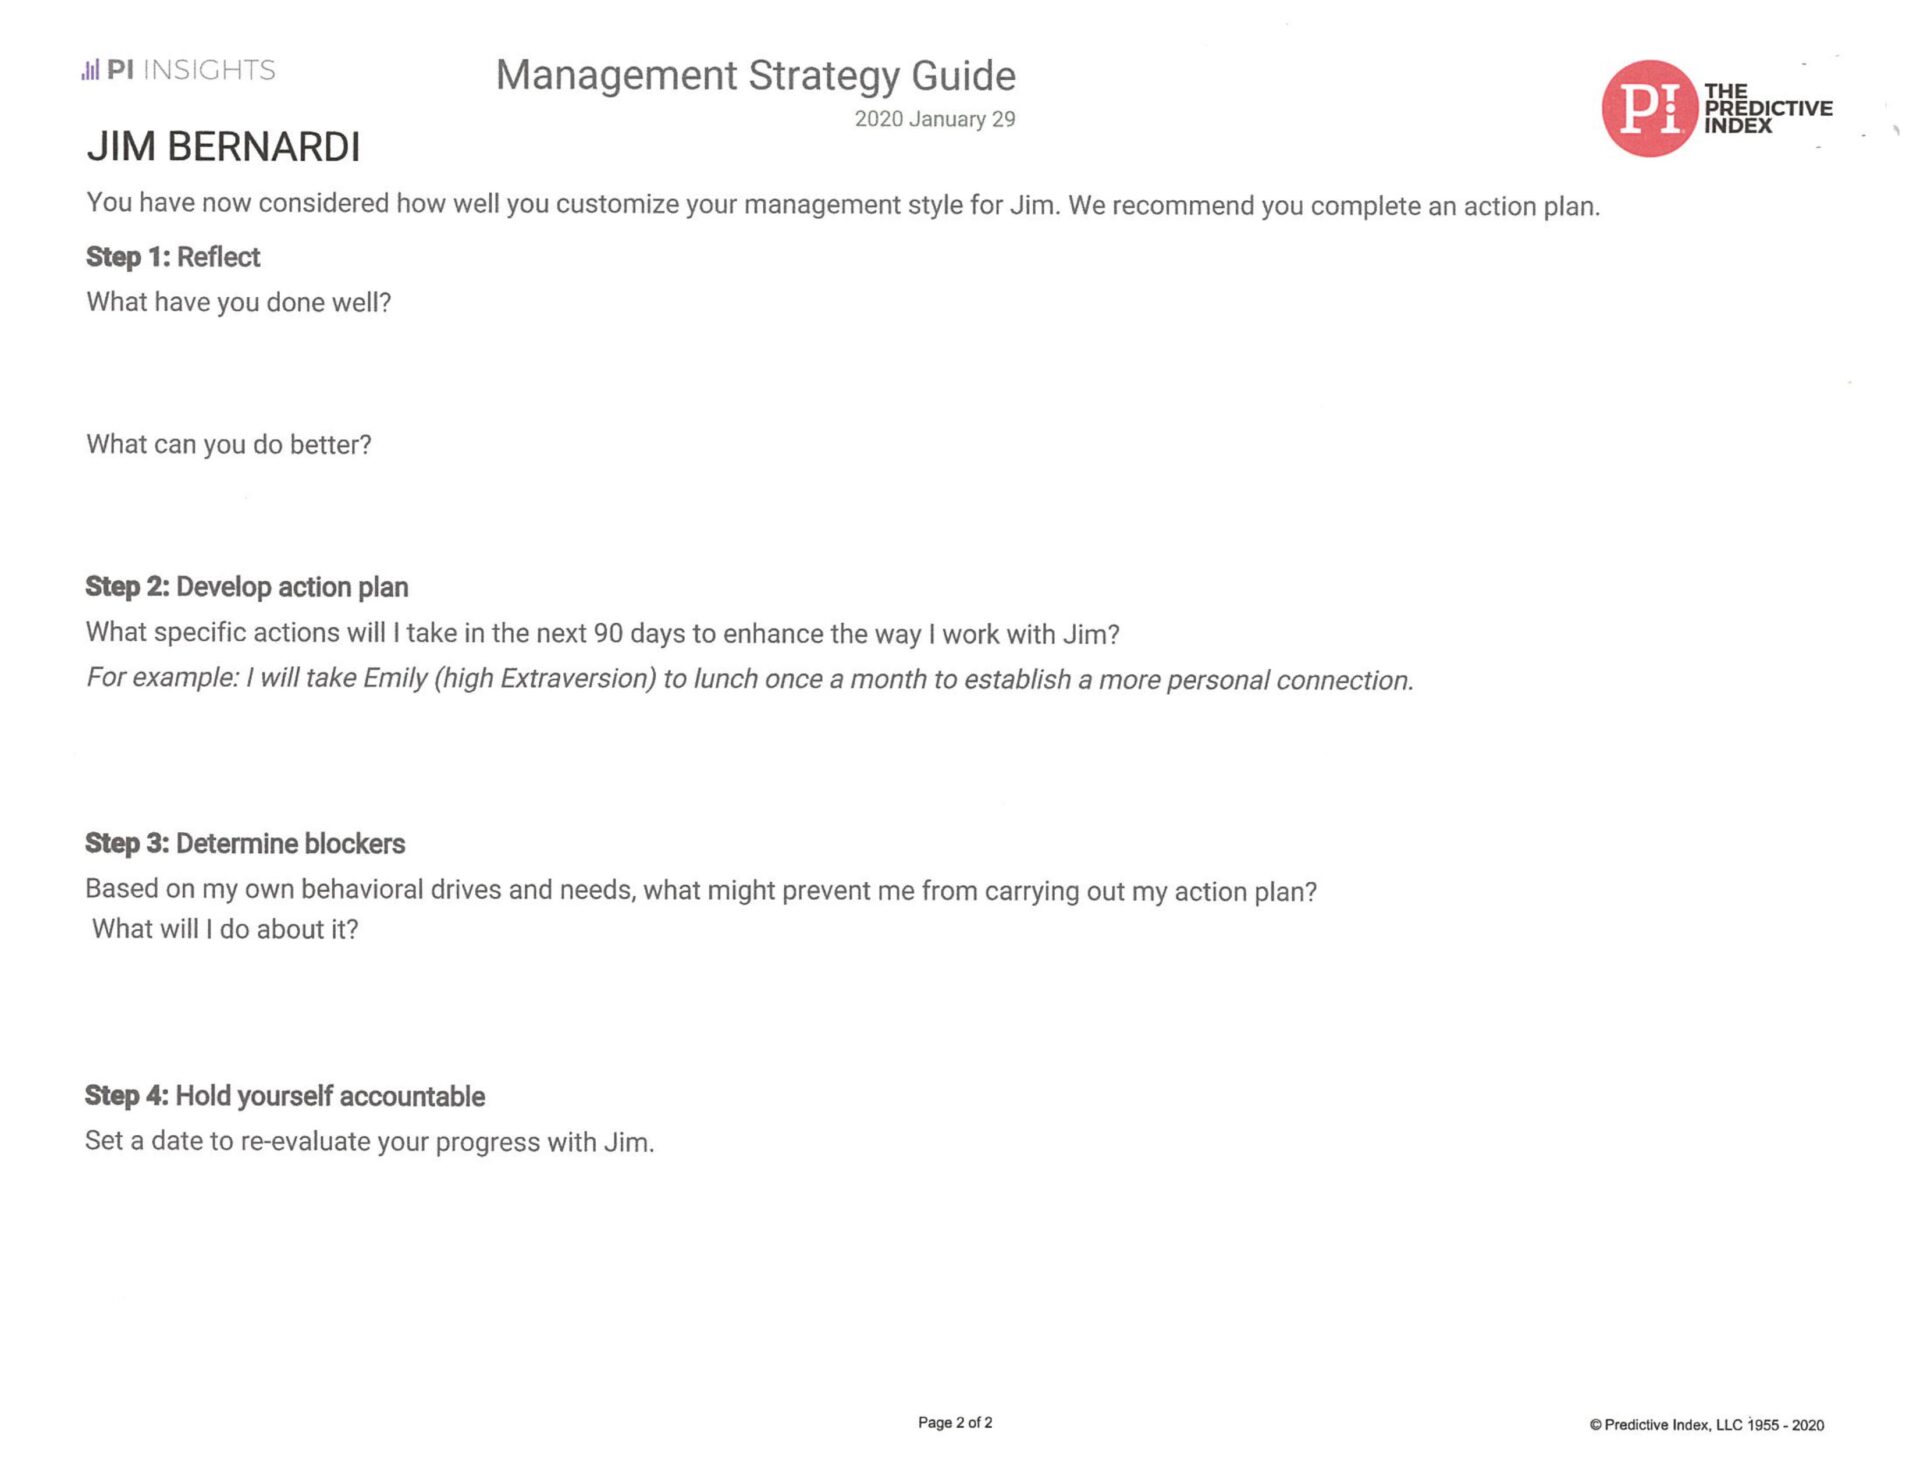 A blank management strategy guide